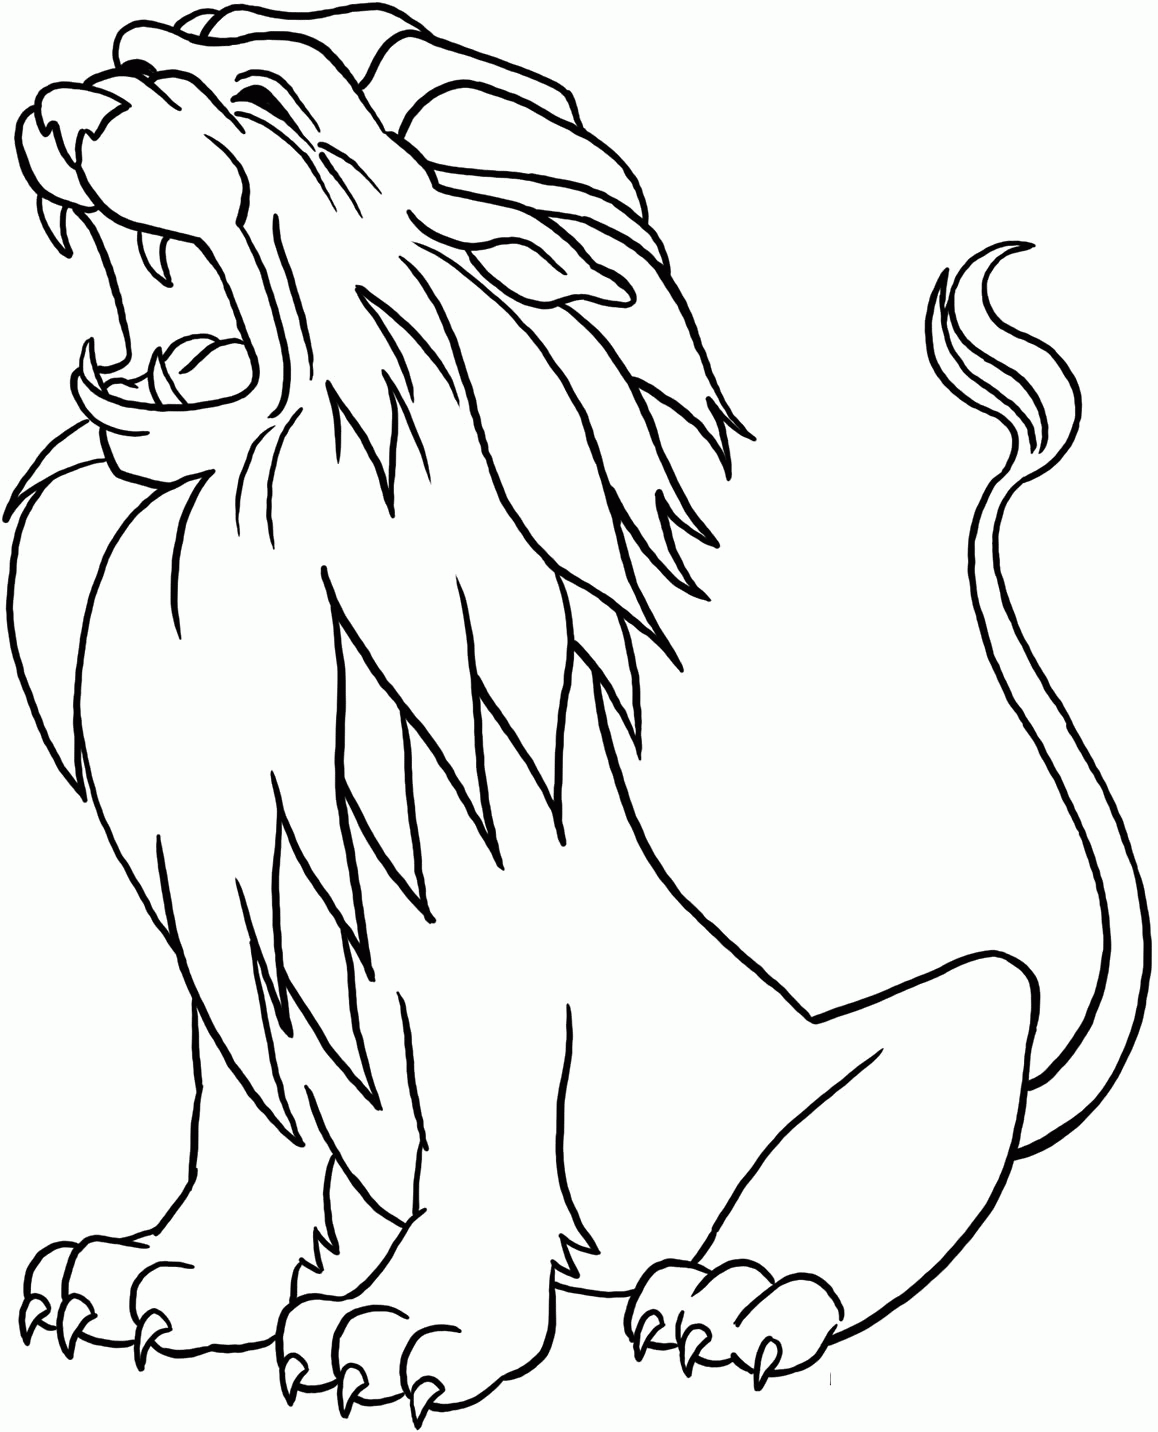 lions pictures to color - Clip Art Library